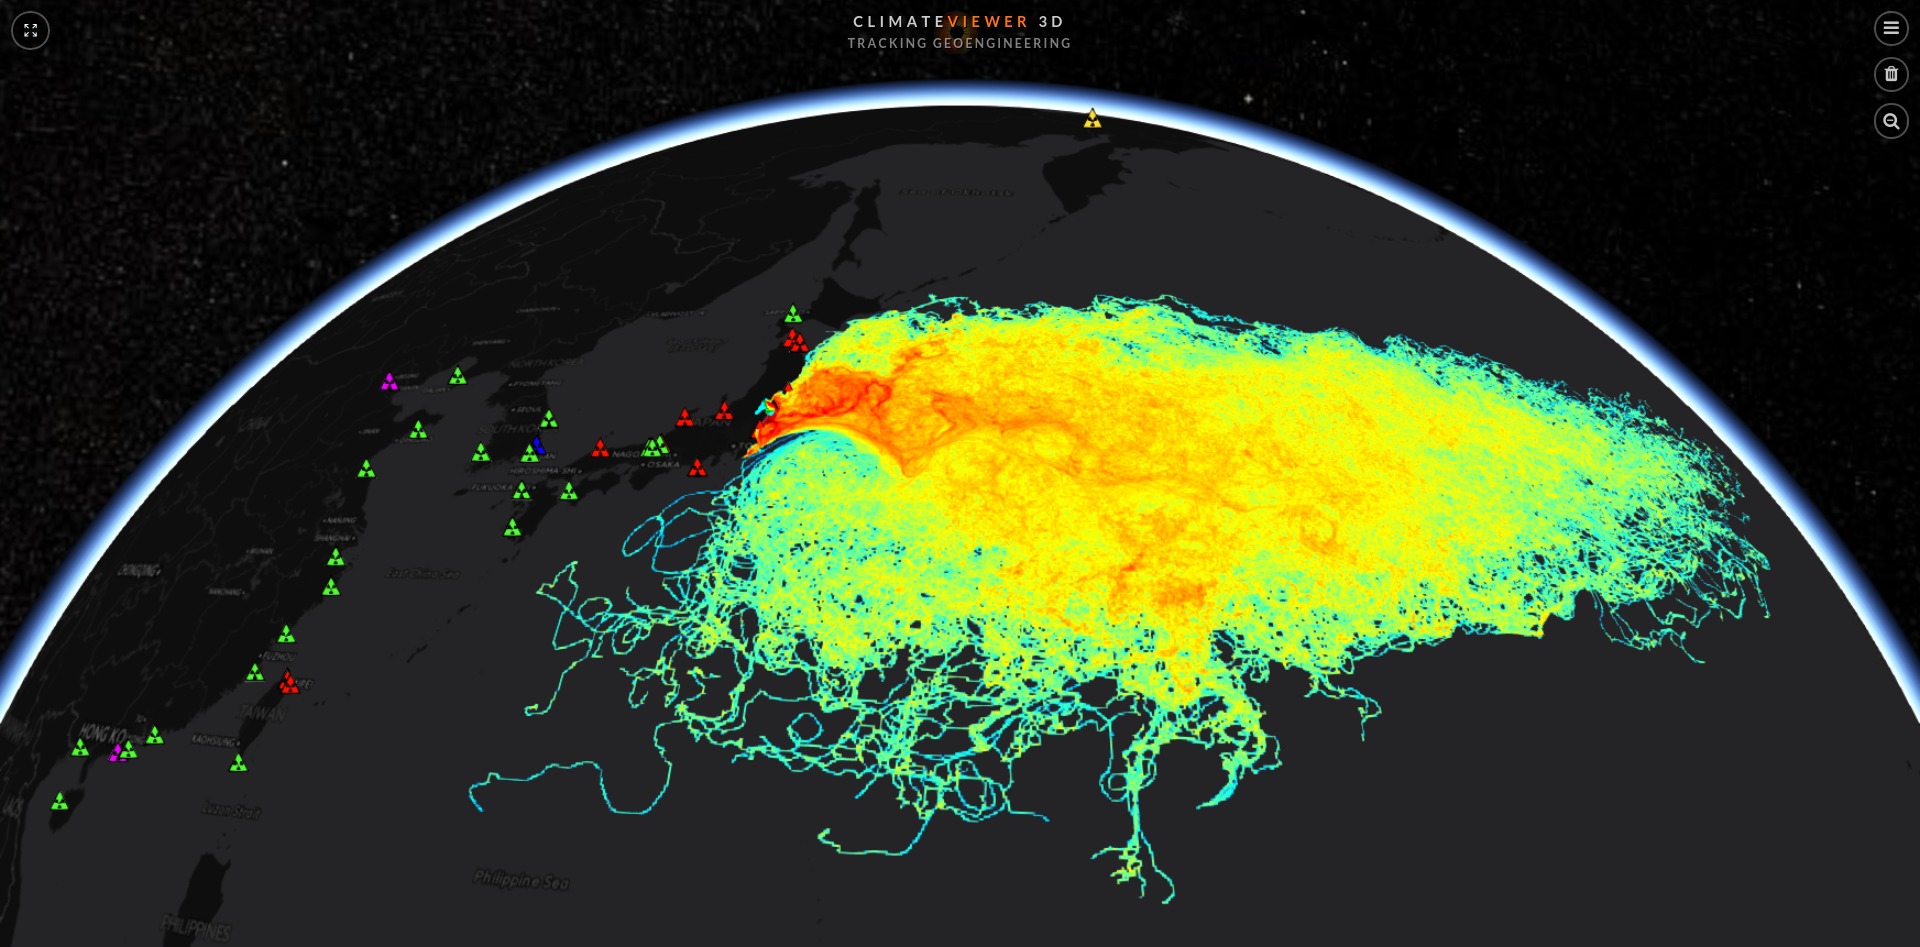 nuclear-reactor-map-climate-viewer-3D